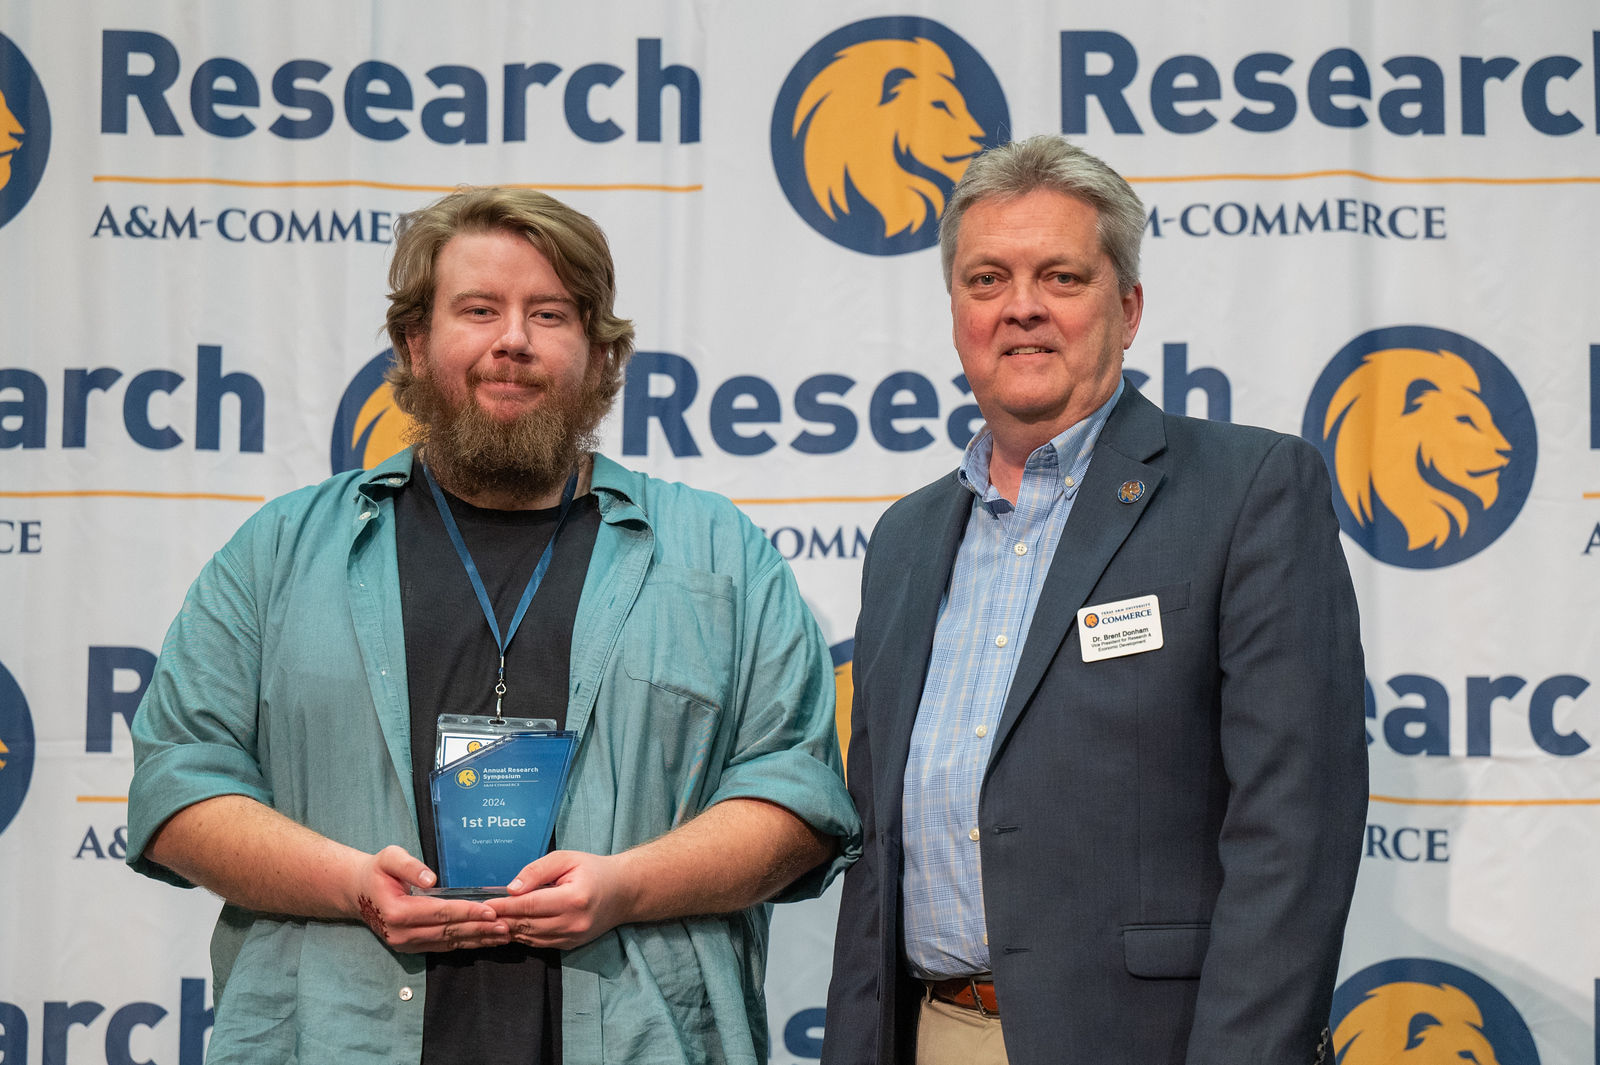 Joshua Belieu and Dr. Brent Donham stand in front of a white backdrop with A&M-Commerce Research logos, which include the university's lion head.